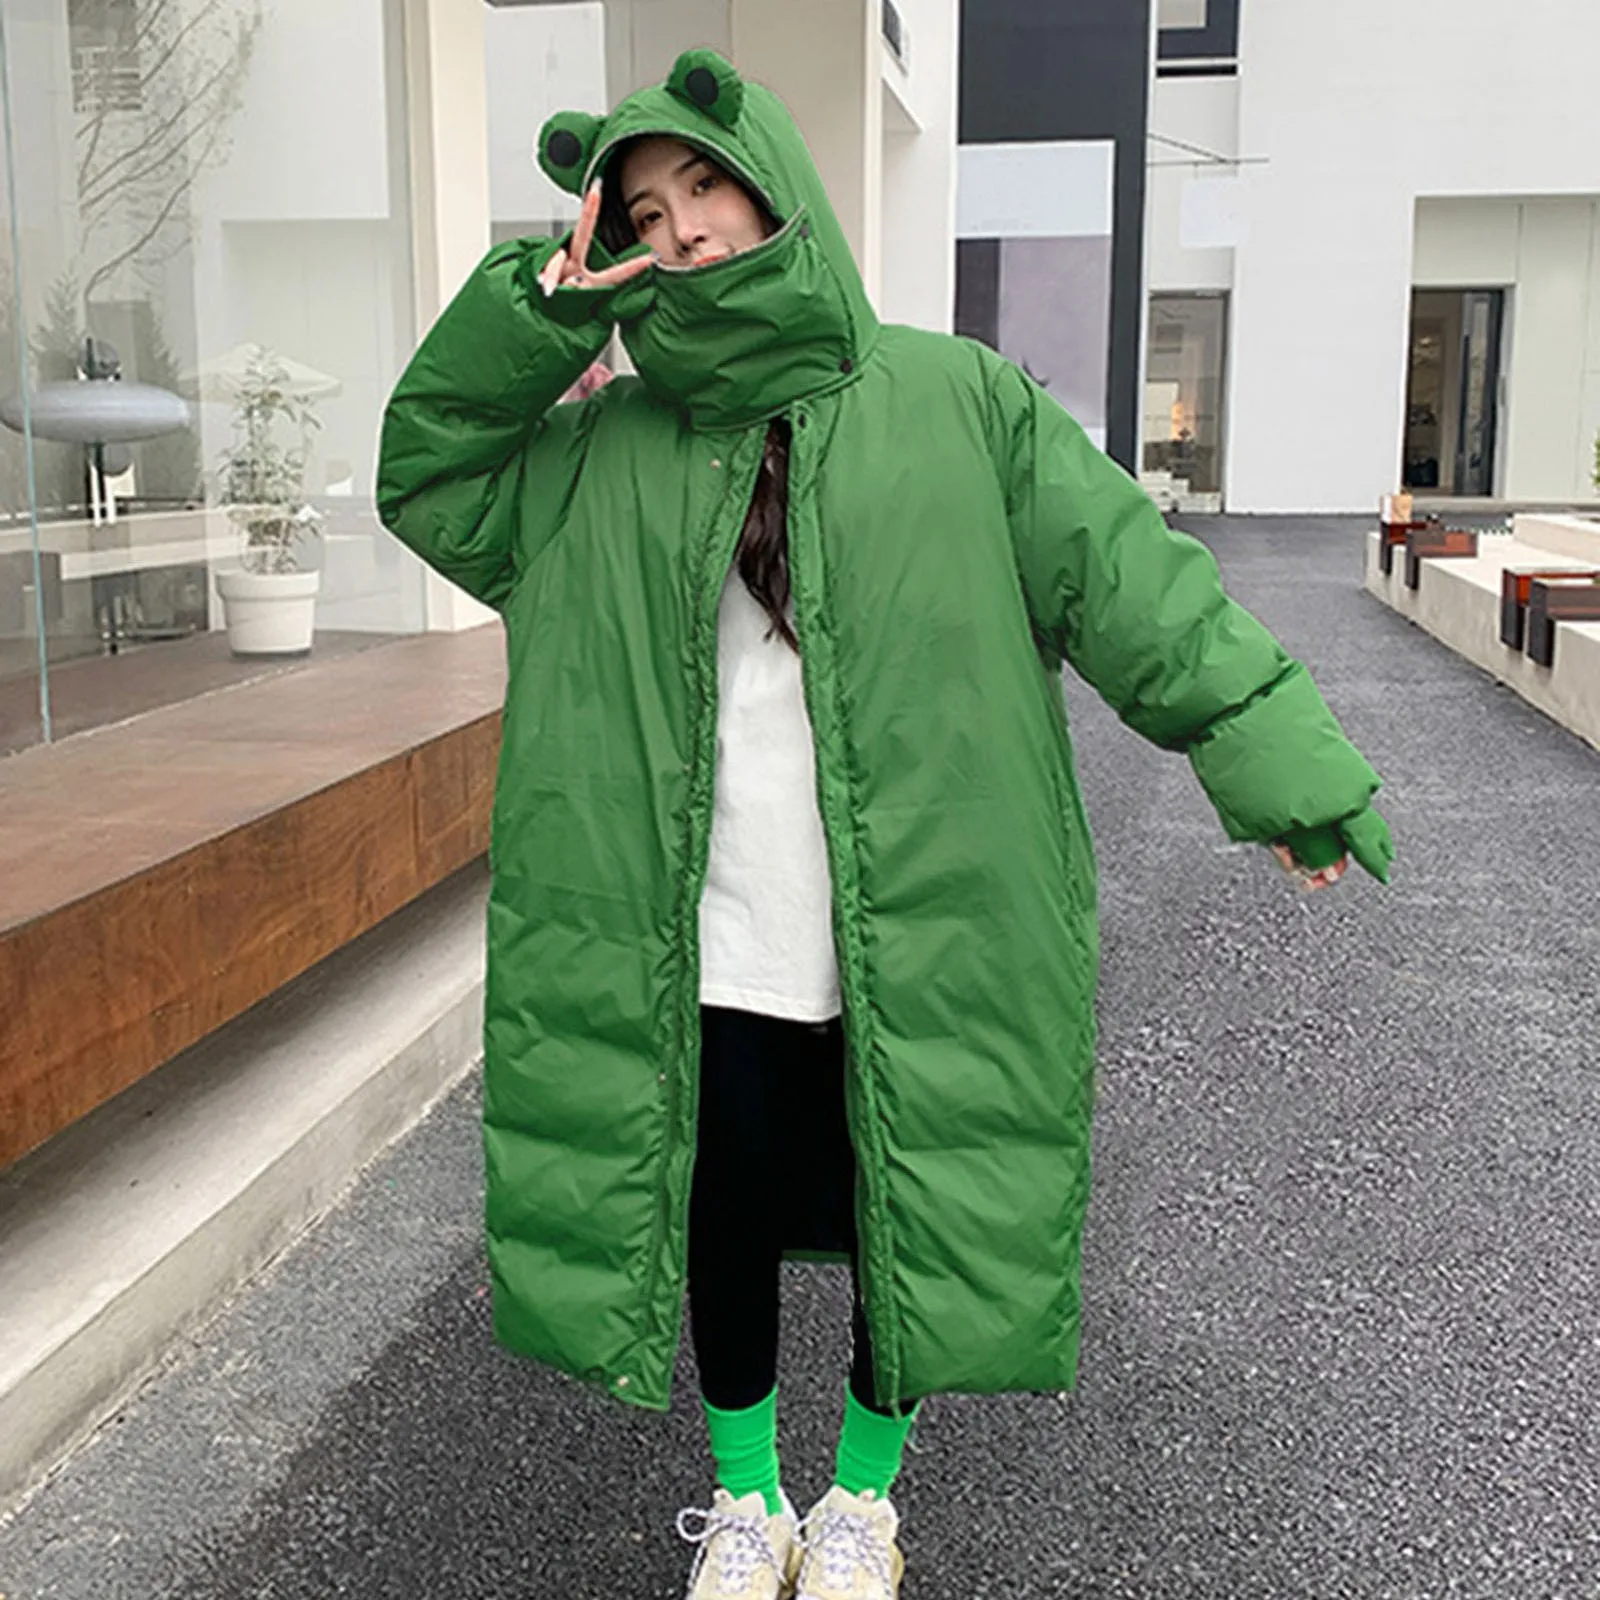 high quality doll suit toys accessories cotton stuffed animals coats 20cm doll clothes mini clothes cartoon hoodies Ugly Funny Fog Jacket Womens Autumn Winter Green Parkas Hoodies Slim Outdoor Padded Blazer Korean Doll Cosplay Chaquetas Mujer